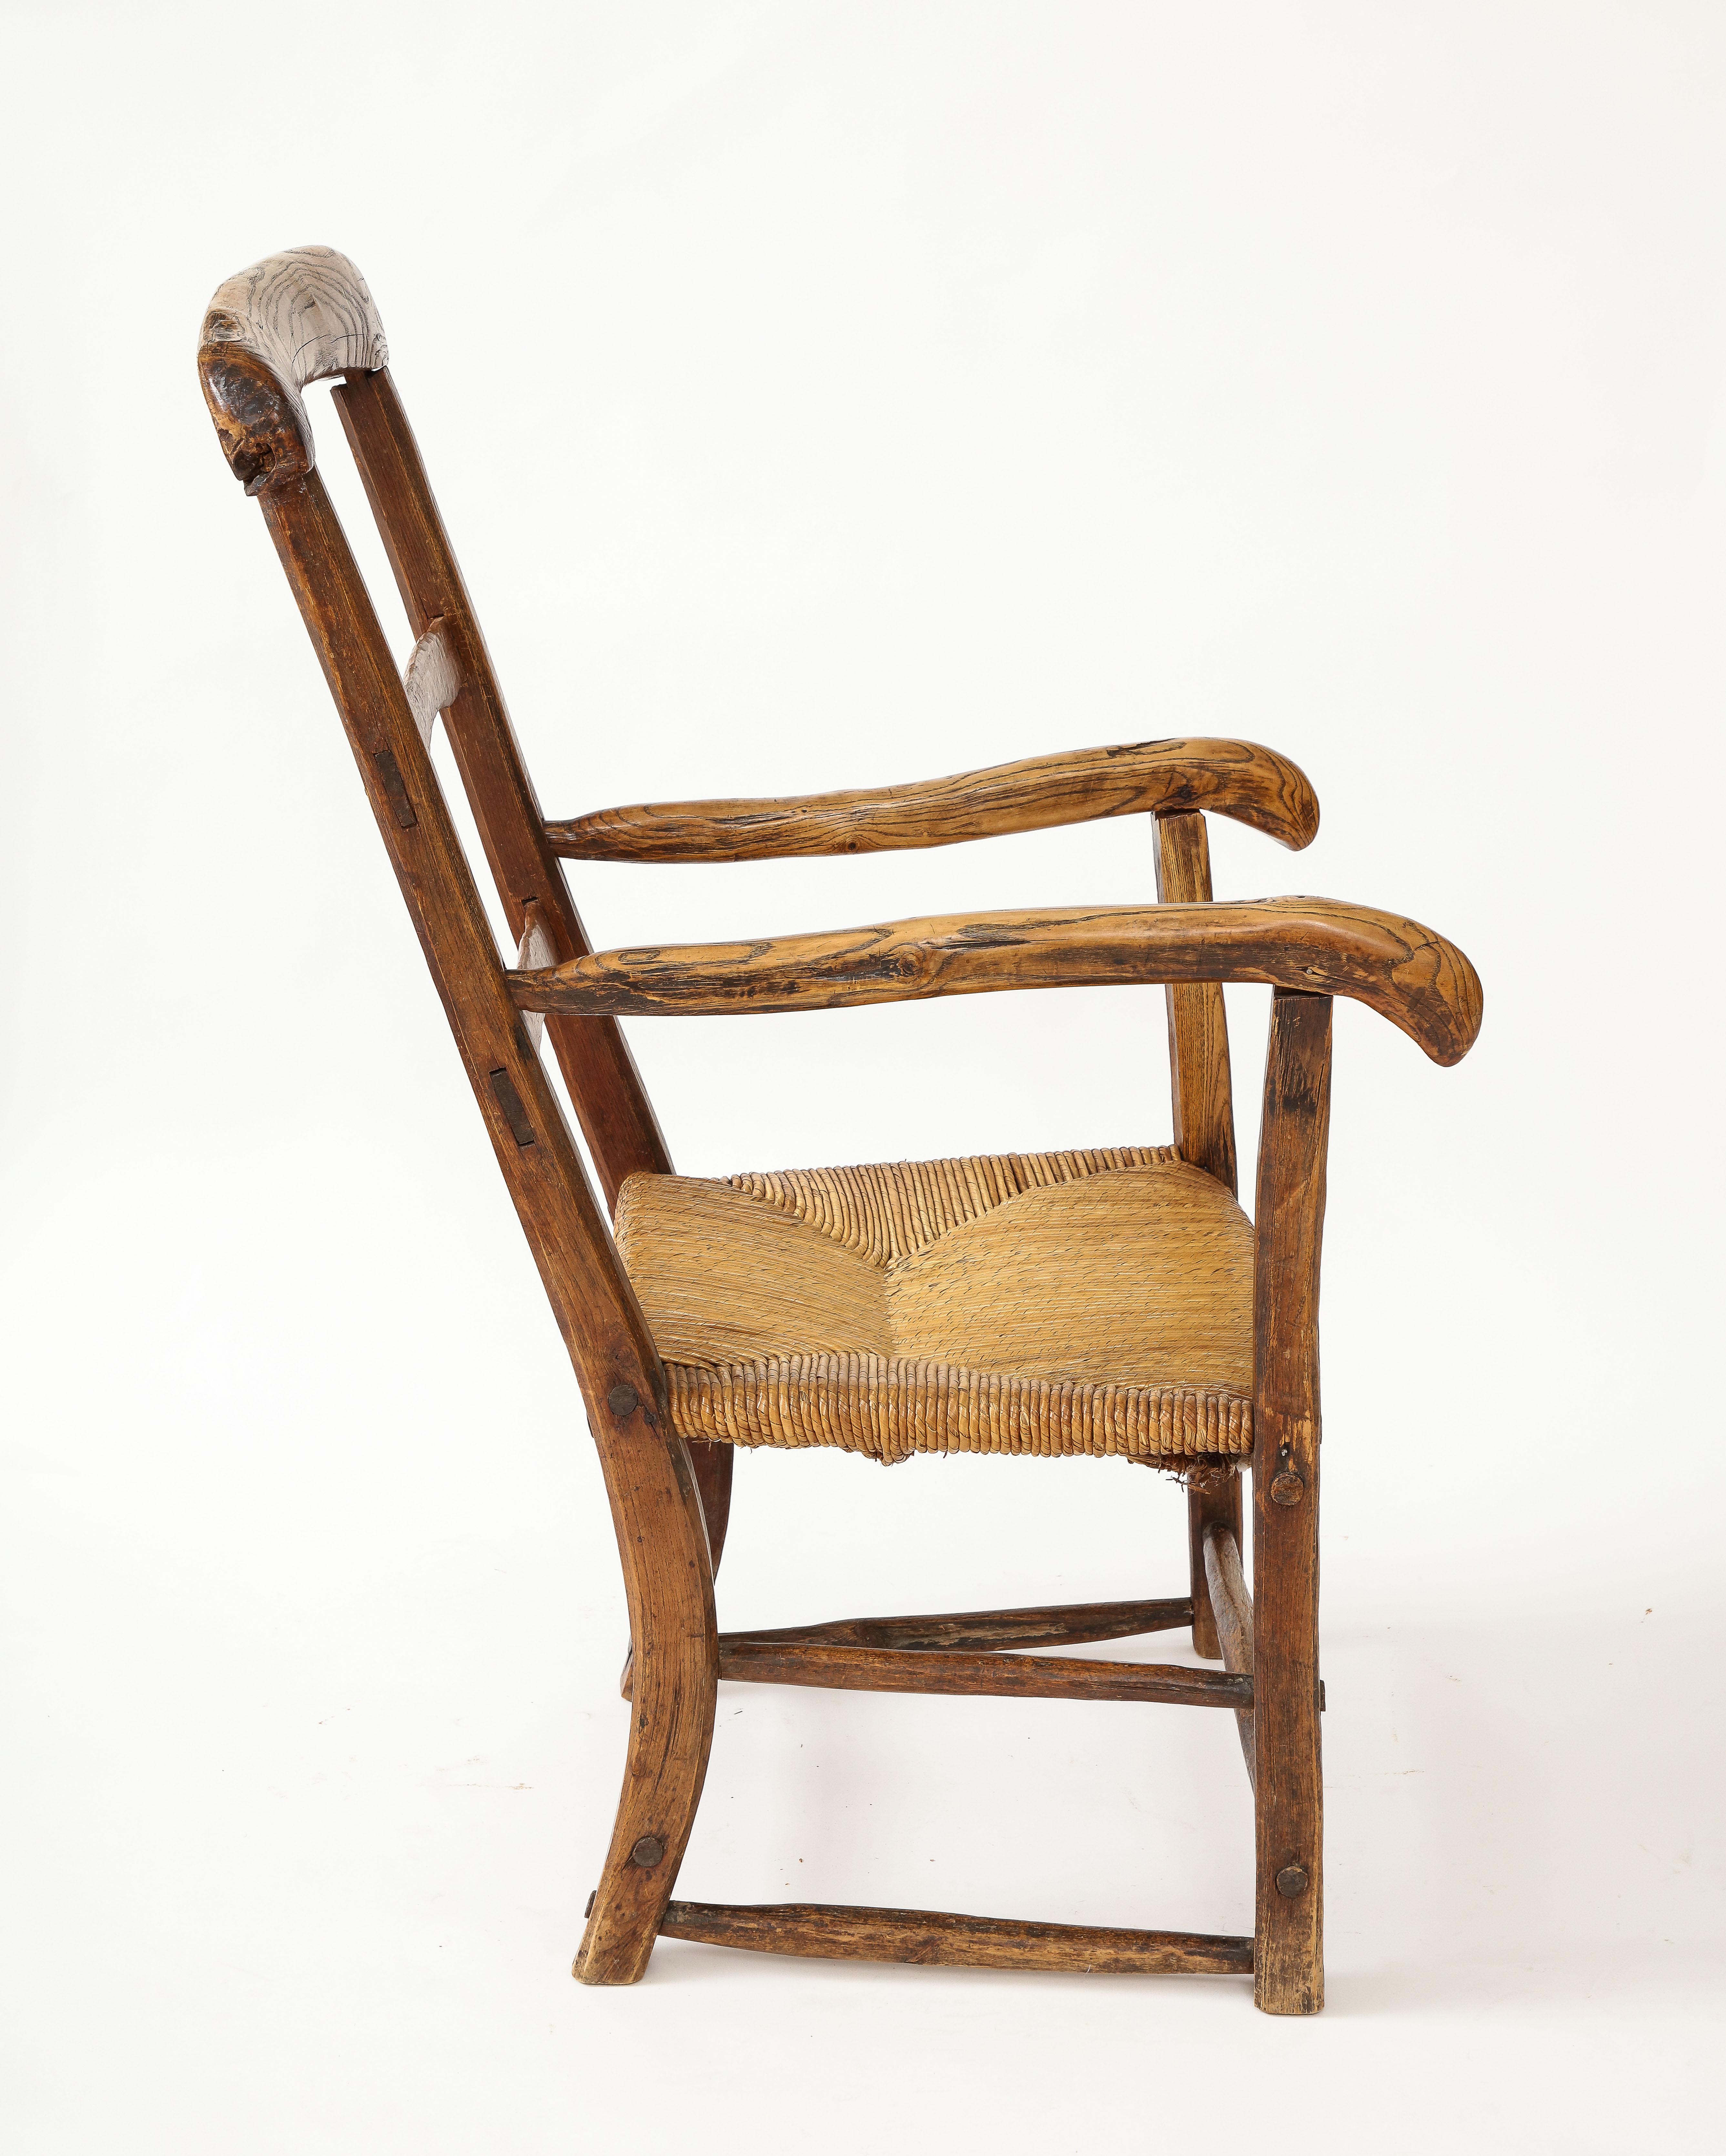 19th Century Rustic French Chair with Straw Seat For Sale 10